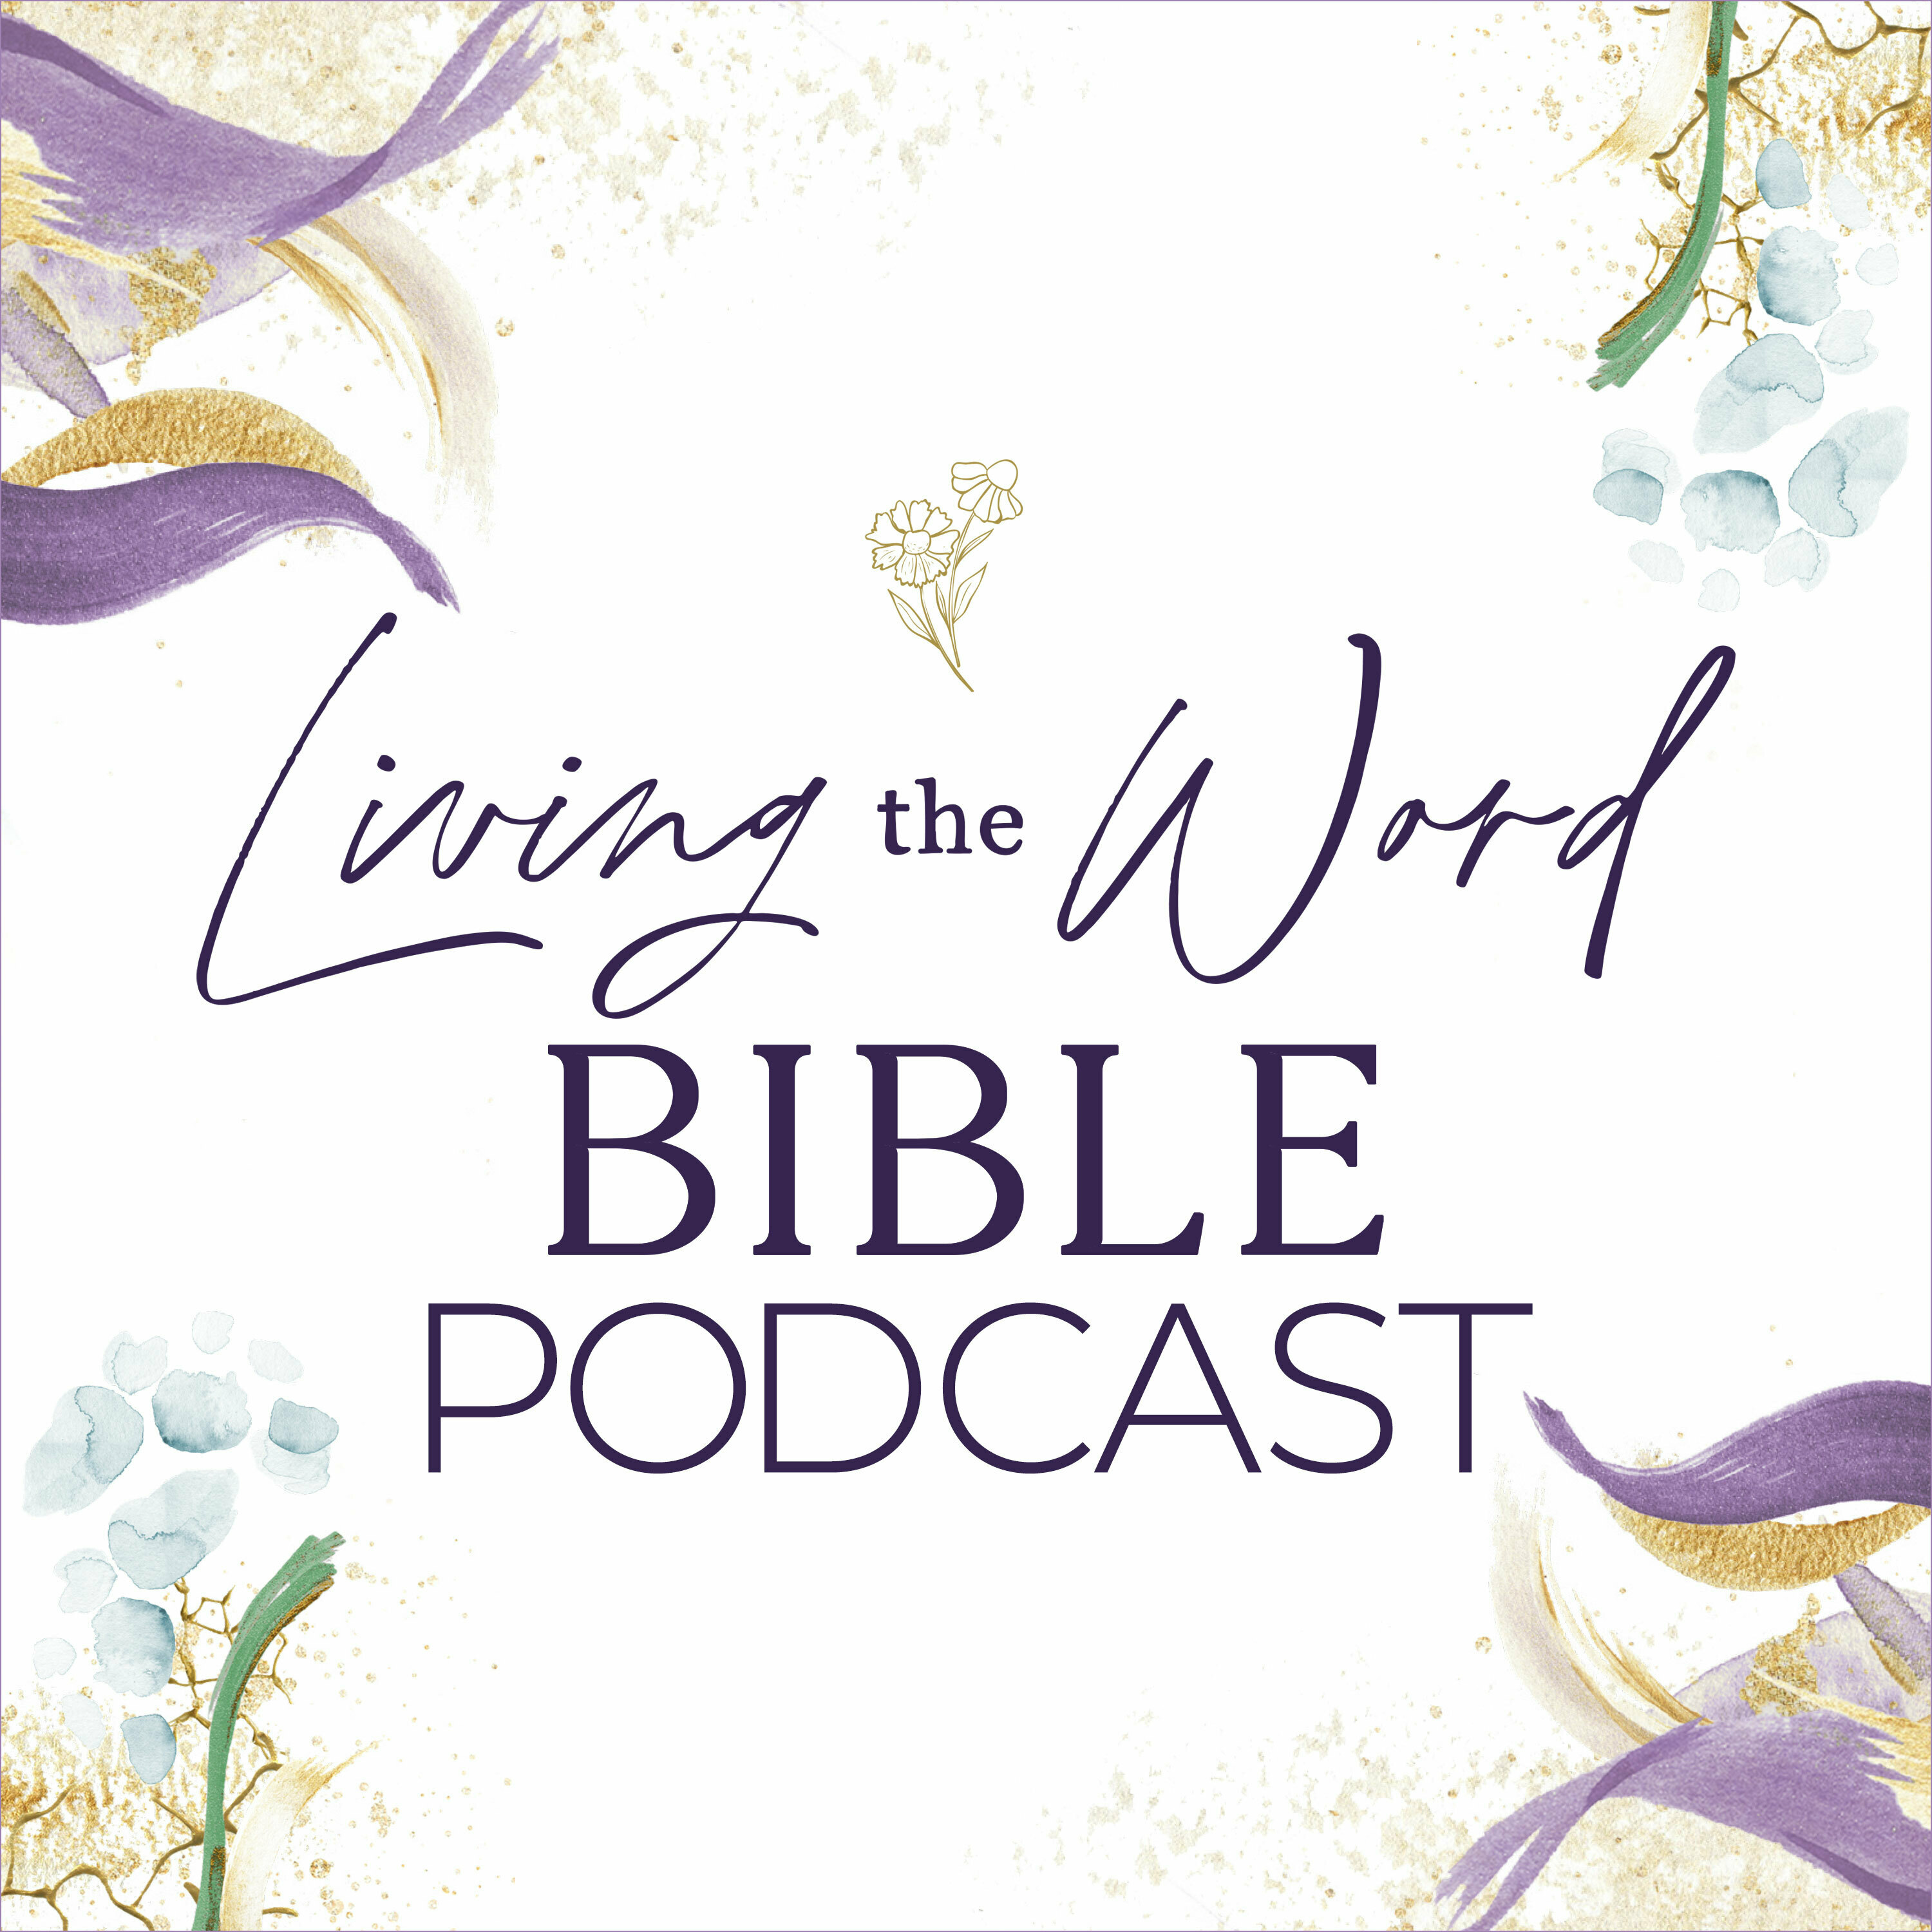 Episode 5: Reading the Bible Can Change Your Life (Really!) featuring Allison Gingras